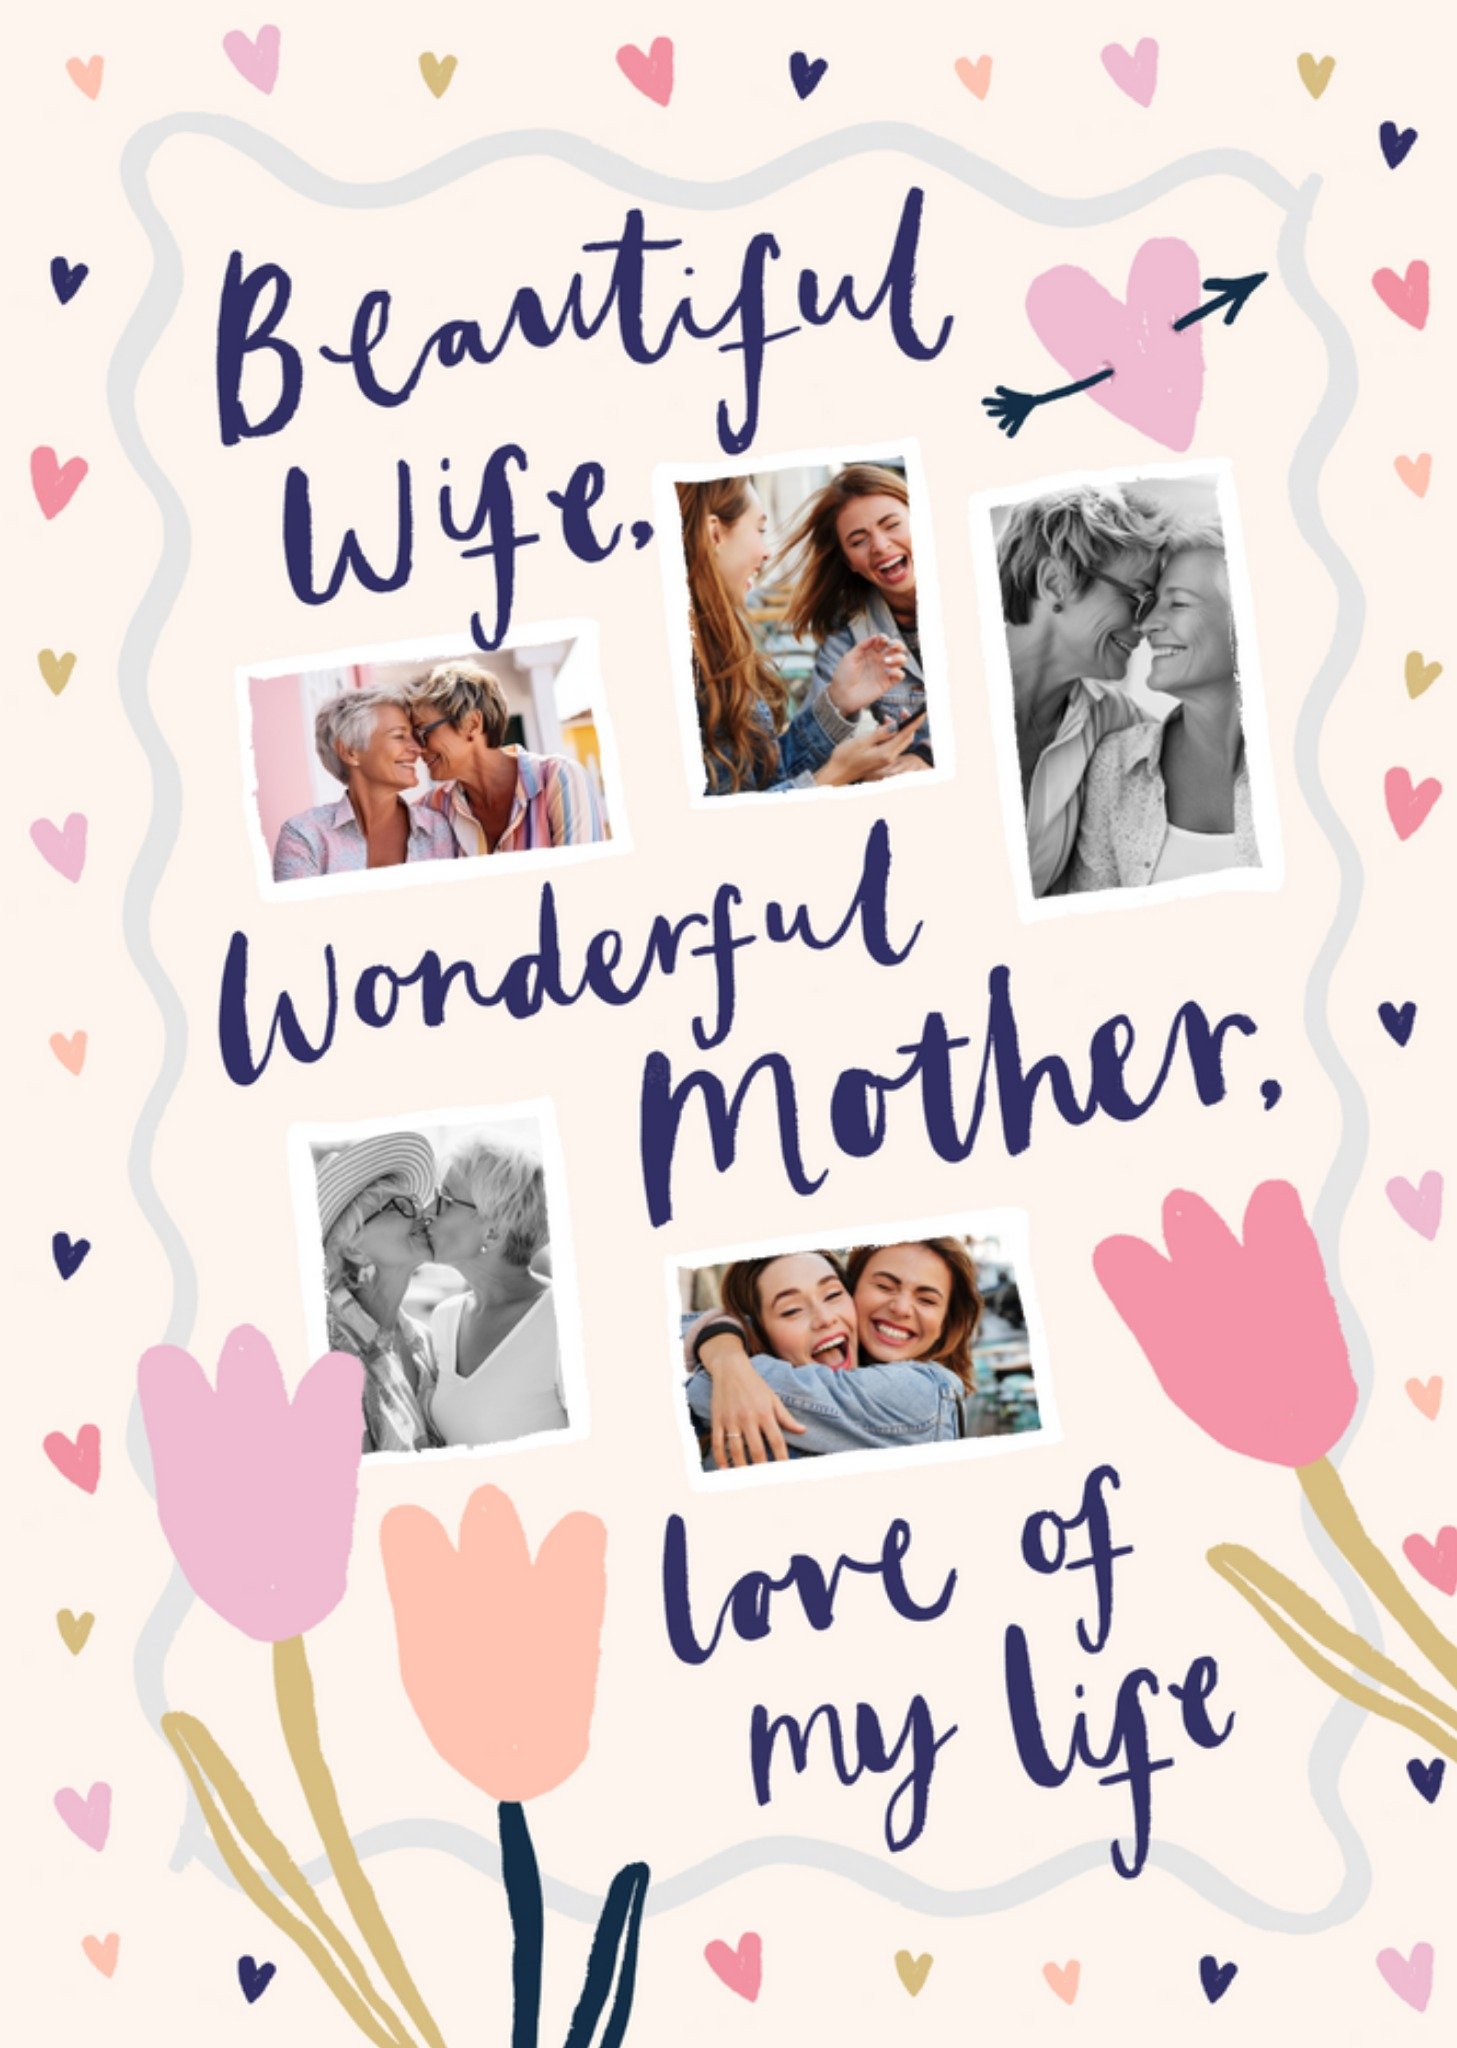 Moonpig Sweet Sentiments Beautiful Wife Wonderful Mother Photo Upload Mother's Day Card, Large